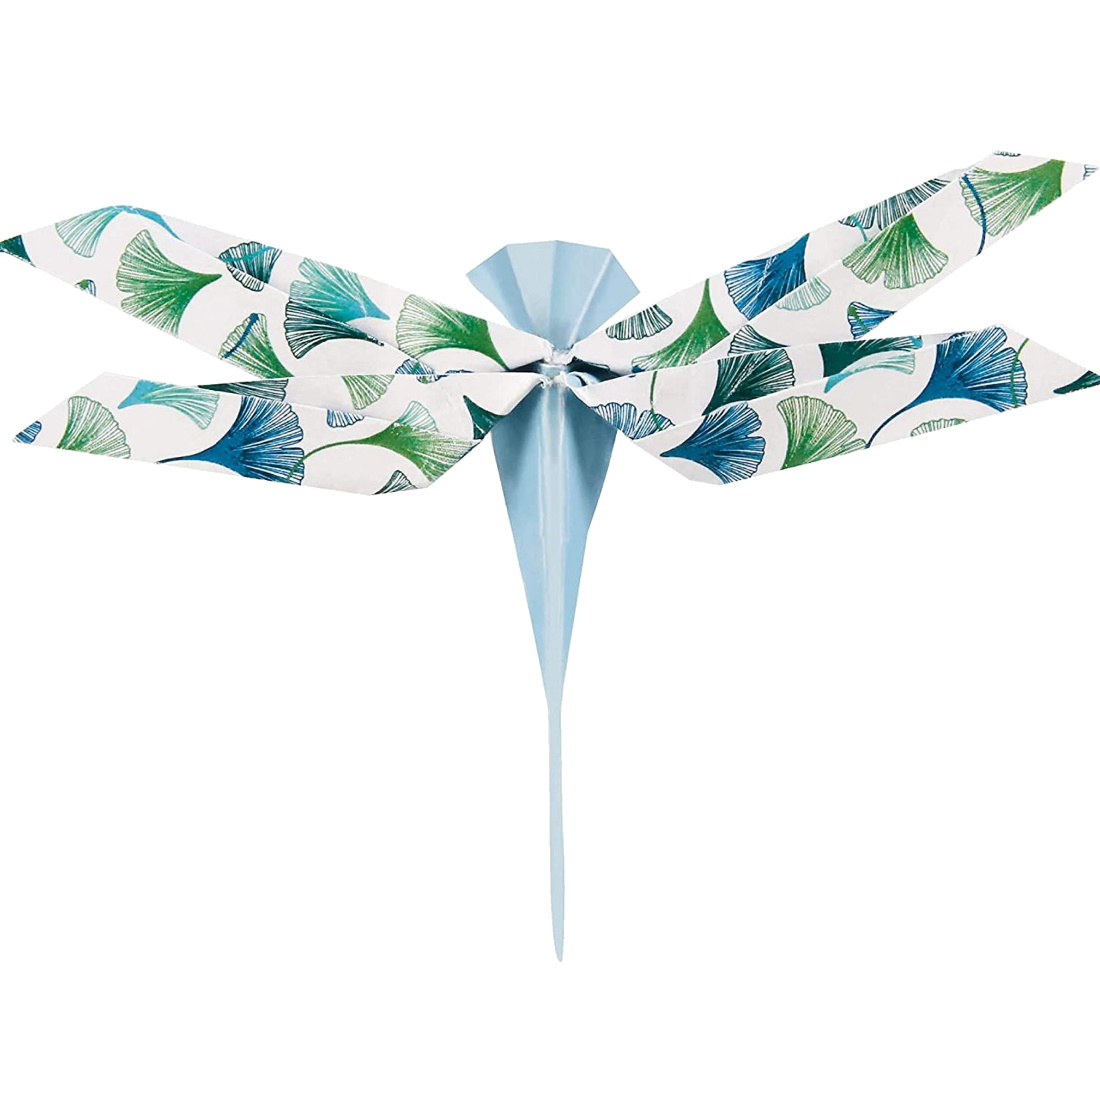 Papel Origami Green Chic clairefontaine